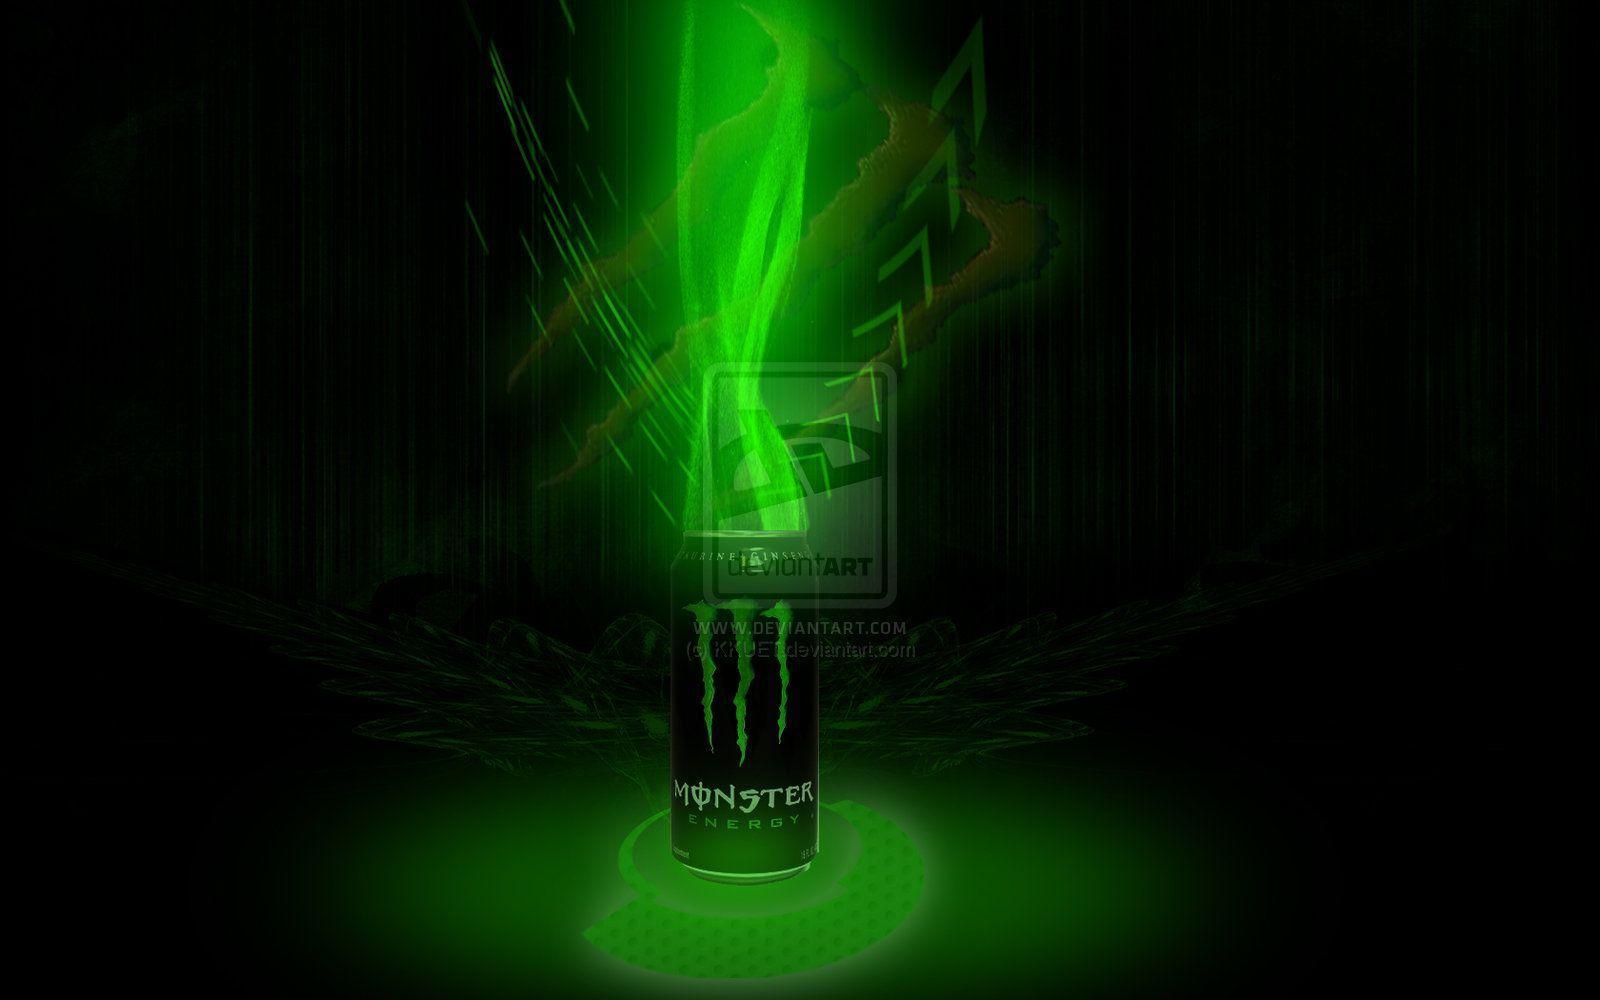 image about monster energy. Monster energy